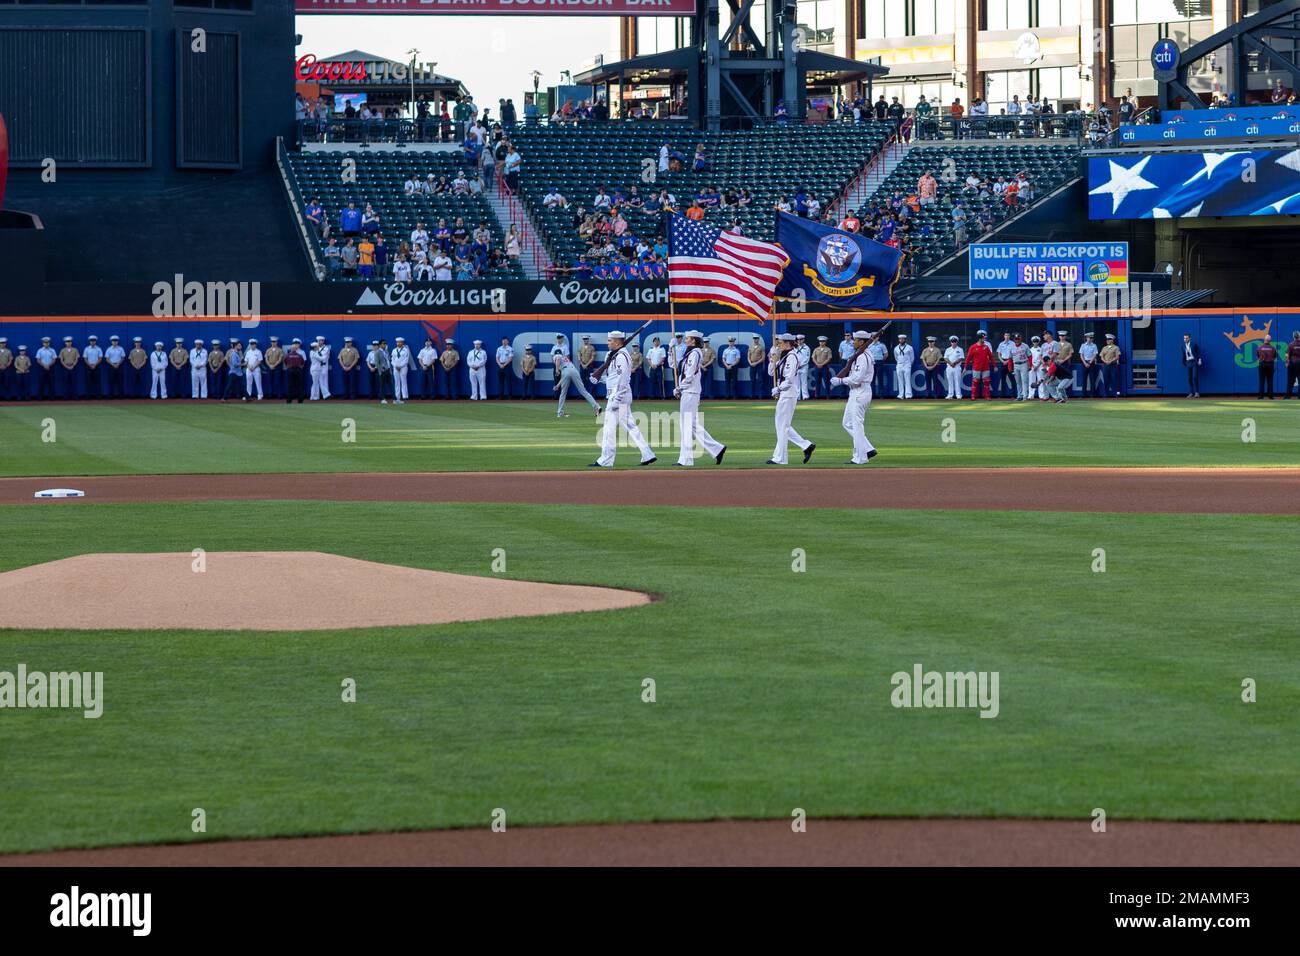 220530-N-OM737-1221  NEW YORK (May 30, 2022) -  Sailors assigned to amphibious assault ship USS Bataan (LHD 5) parade the colors at a N.Y. Mets Major League Baseball game during Fleet Week New York, May 30, 2022. Bataan is participating in Fleet Week New York.  Bataan is homeported at Naval Station Norfolk. Stock Photo